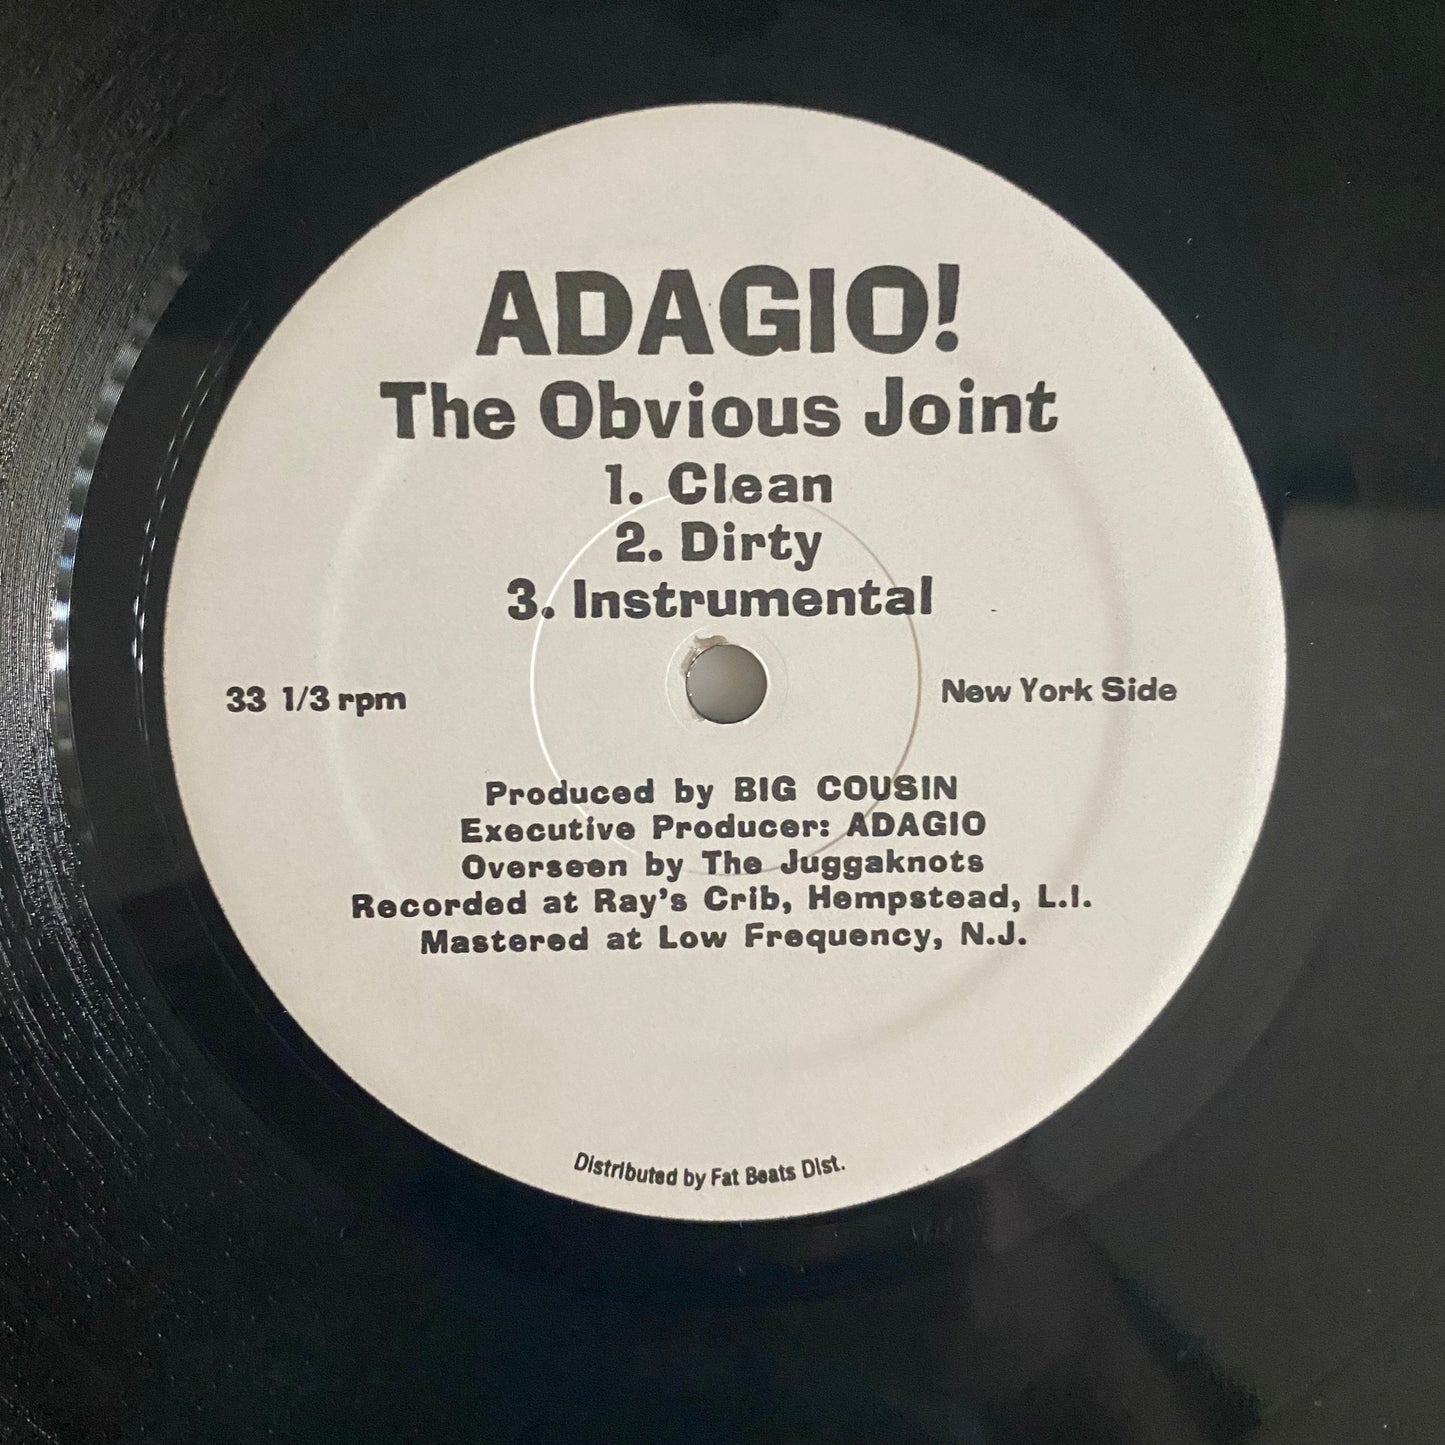 Adagio! - The Obvious Joint / Ass & Benefits (12", RE). 12" HIP-HOP